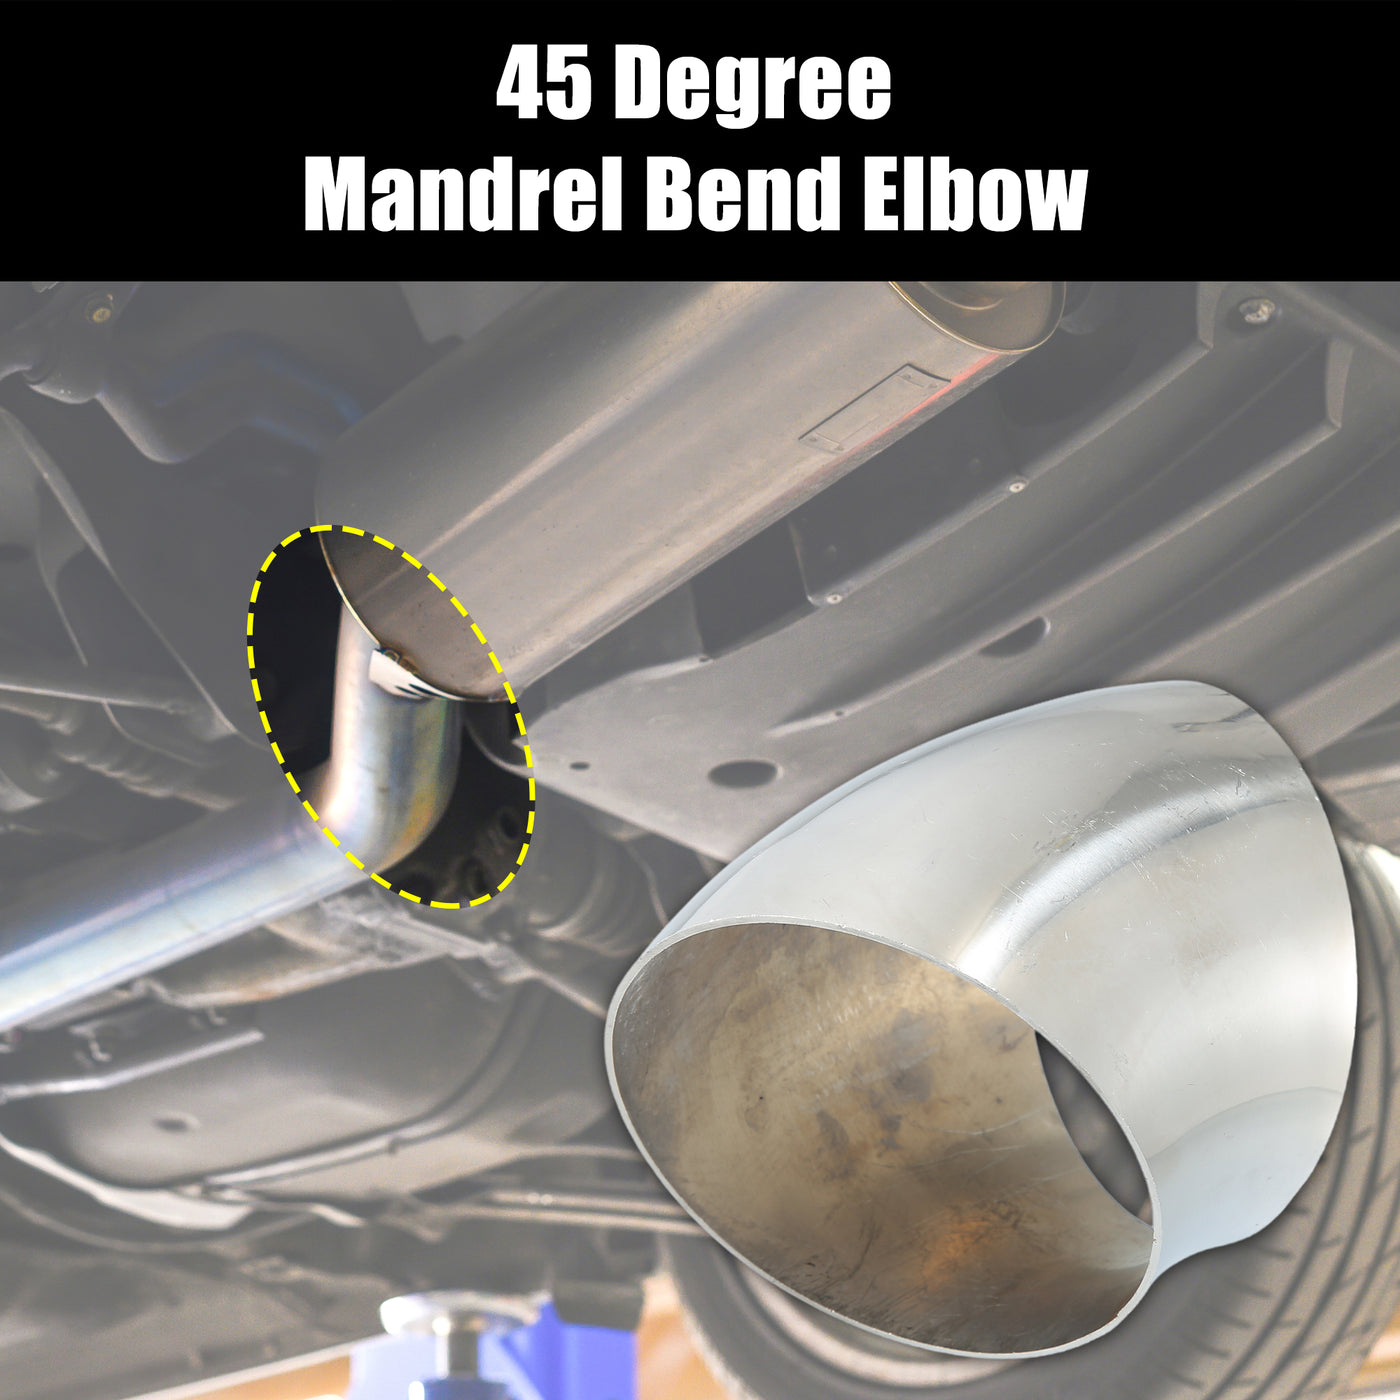 X AUTOHAUX OD 4" 45 Degree Mandrel Bend Exhaust Elbow Pipe SS304 Stainless Steel Bend Tube 16GA /.060" Wall Thickness Exhaust Piping for Car Exhaust Pipe Elbow Modified 1pcs